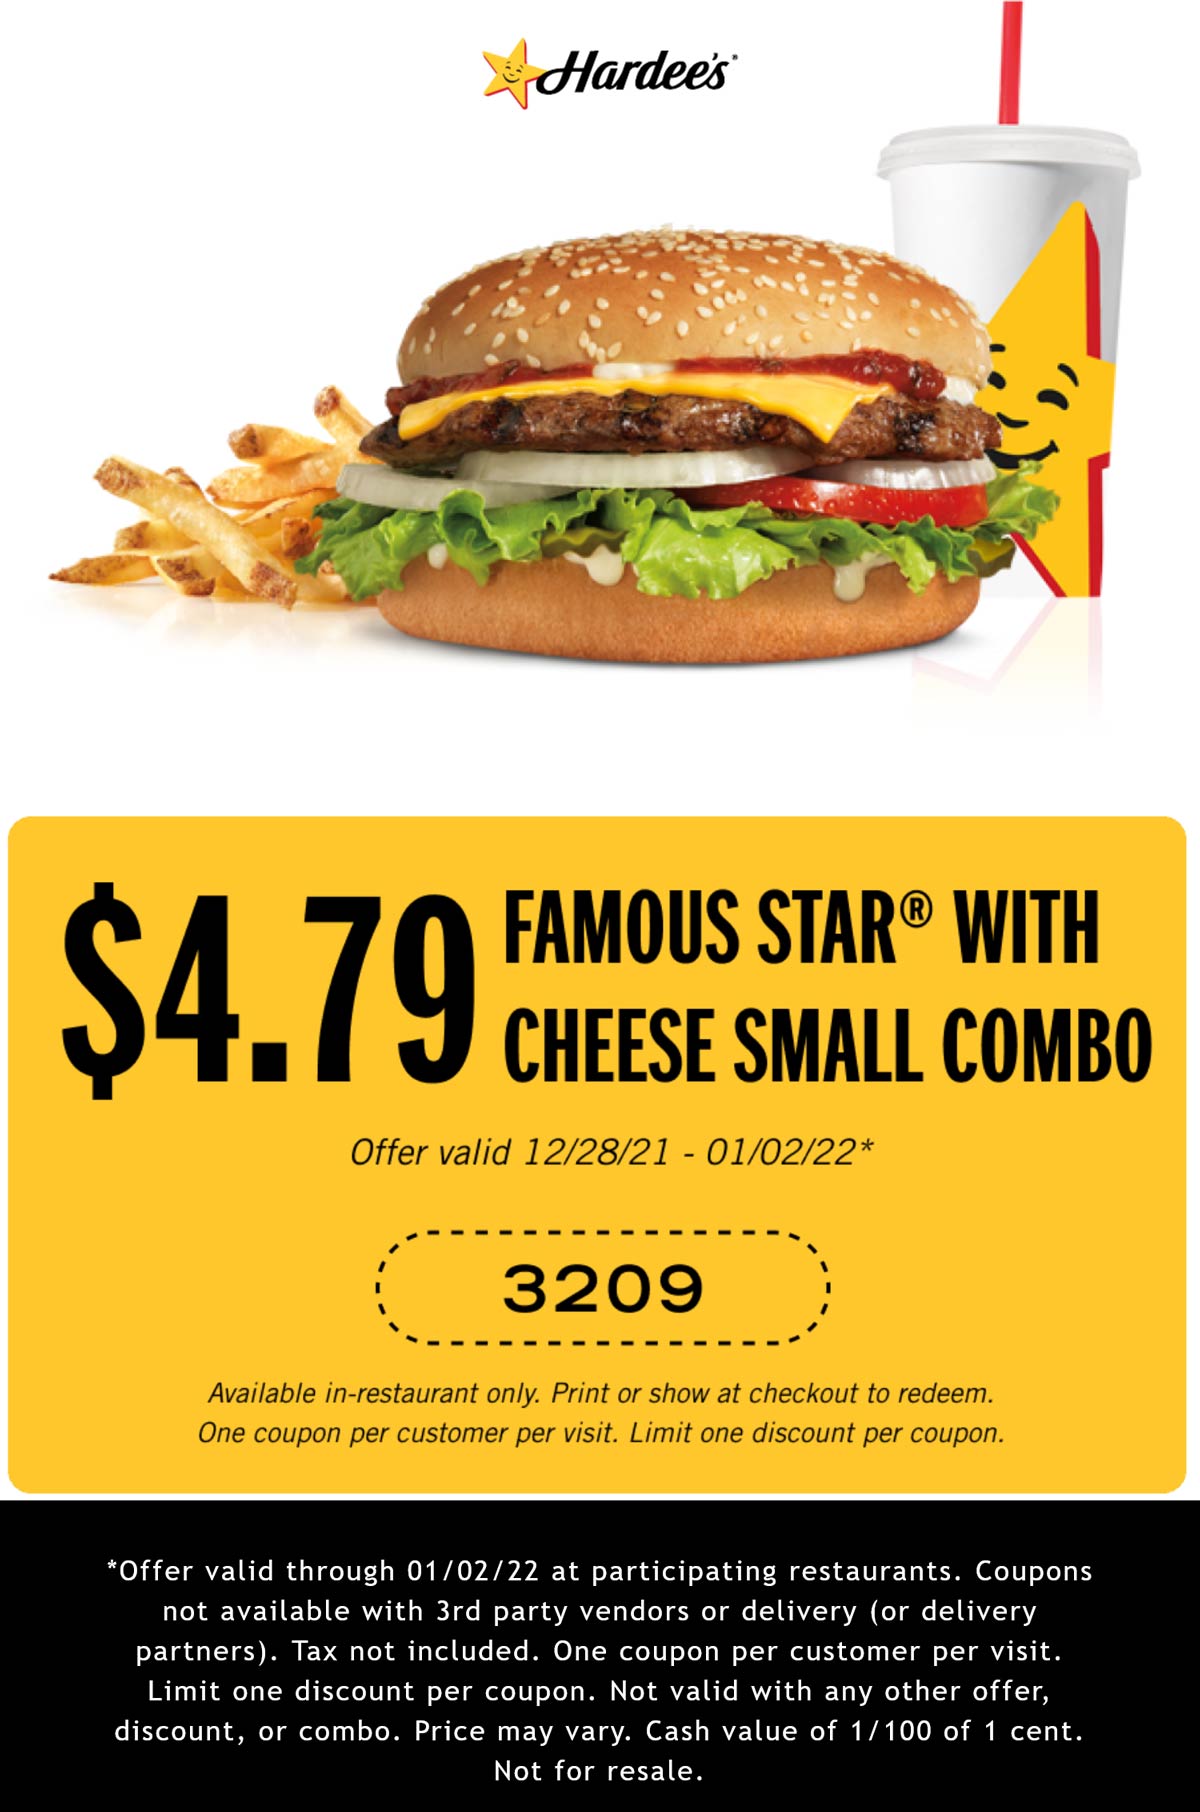 Hardees restaurants Coupon  Famous star cheeseburger + fries + drink = $4.79 at Hardees #hardees 